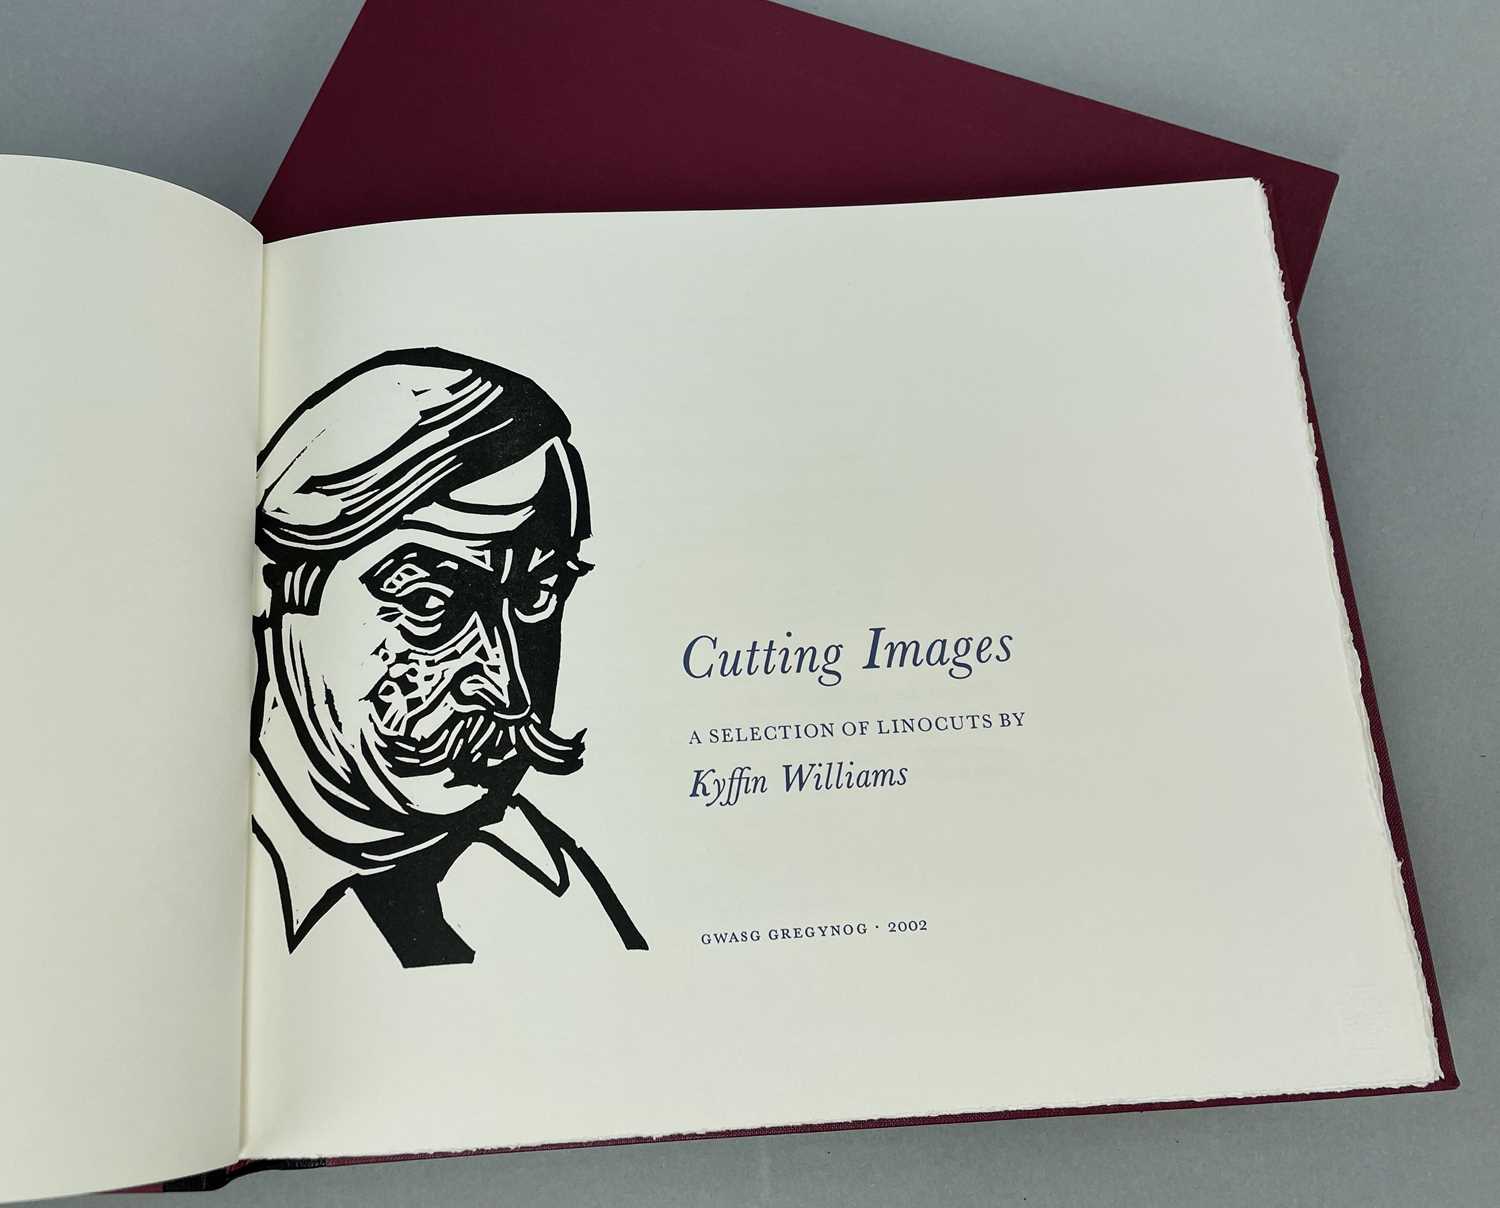 ‡ SIR KYFFIN WILLIAMS RA limited edition (172/275) volume of 'Cutting Images' - printed on T H